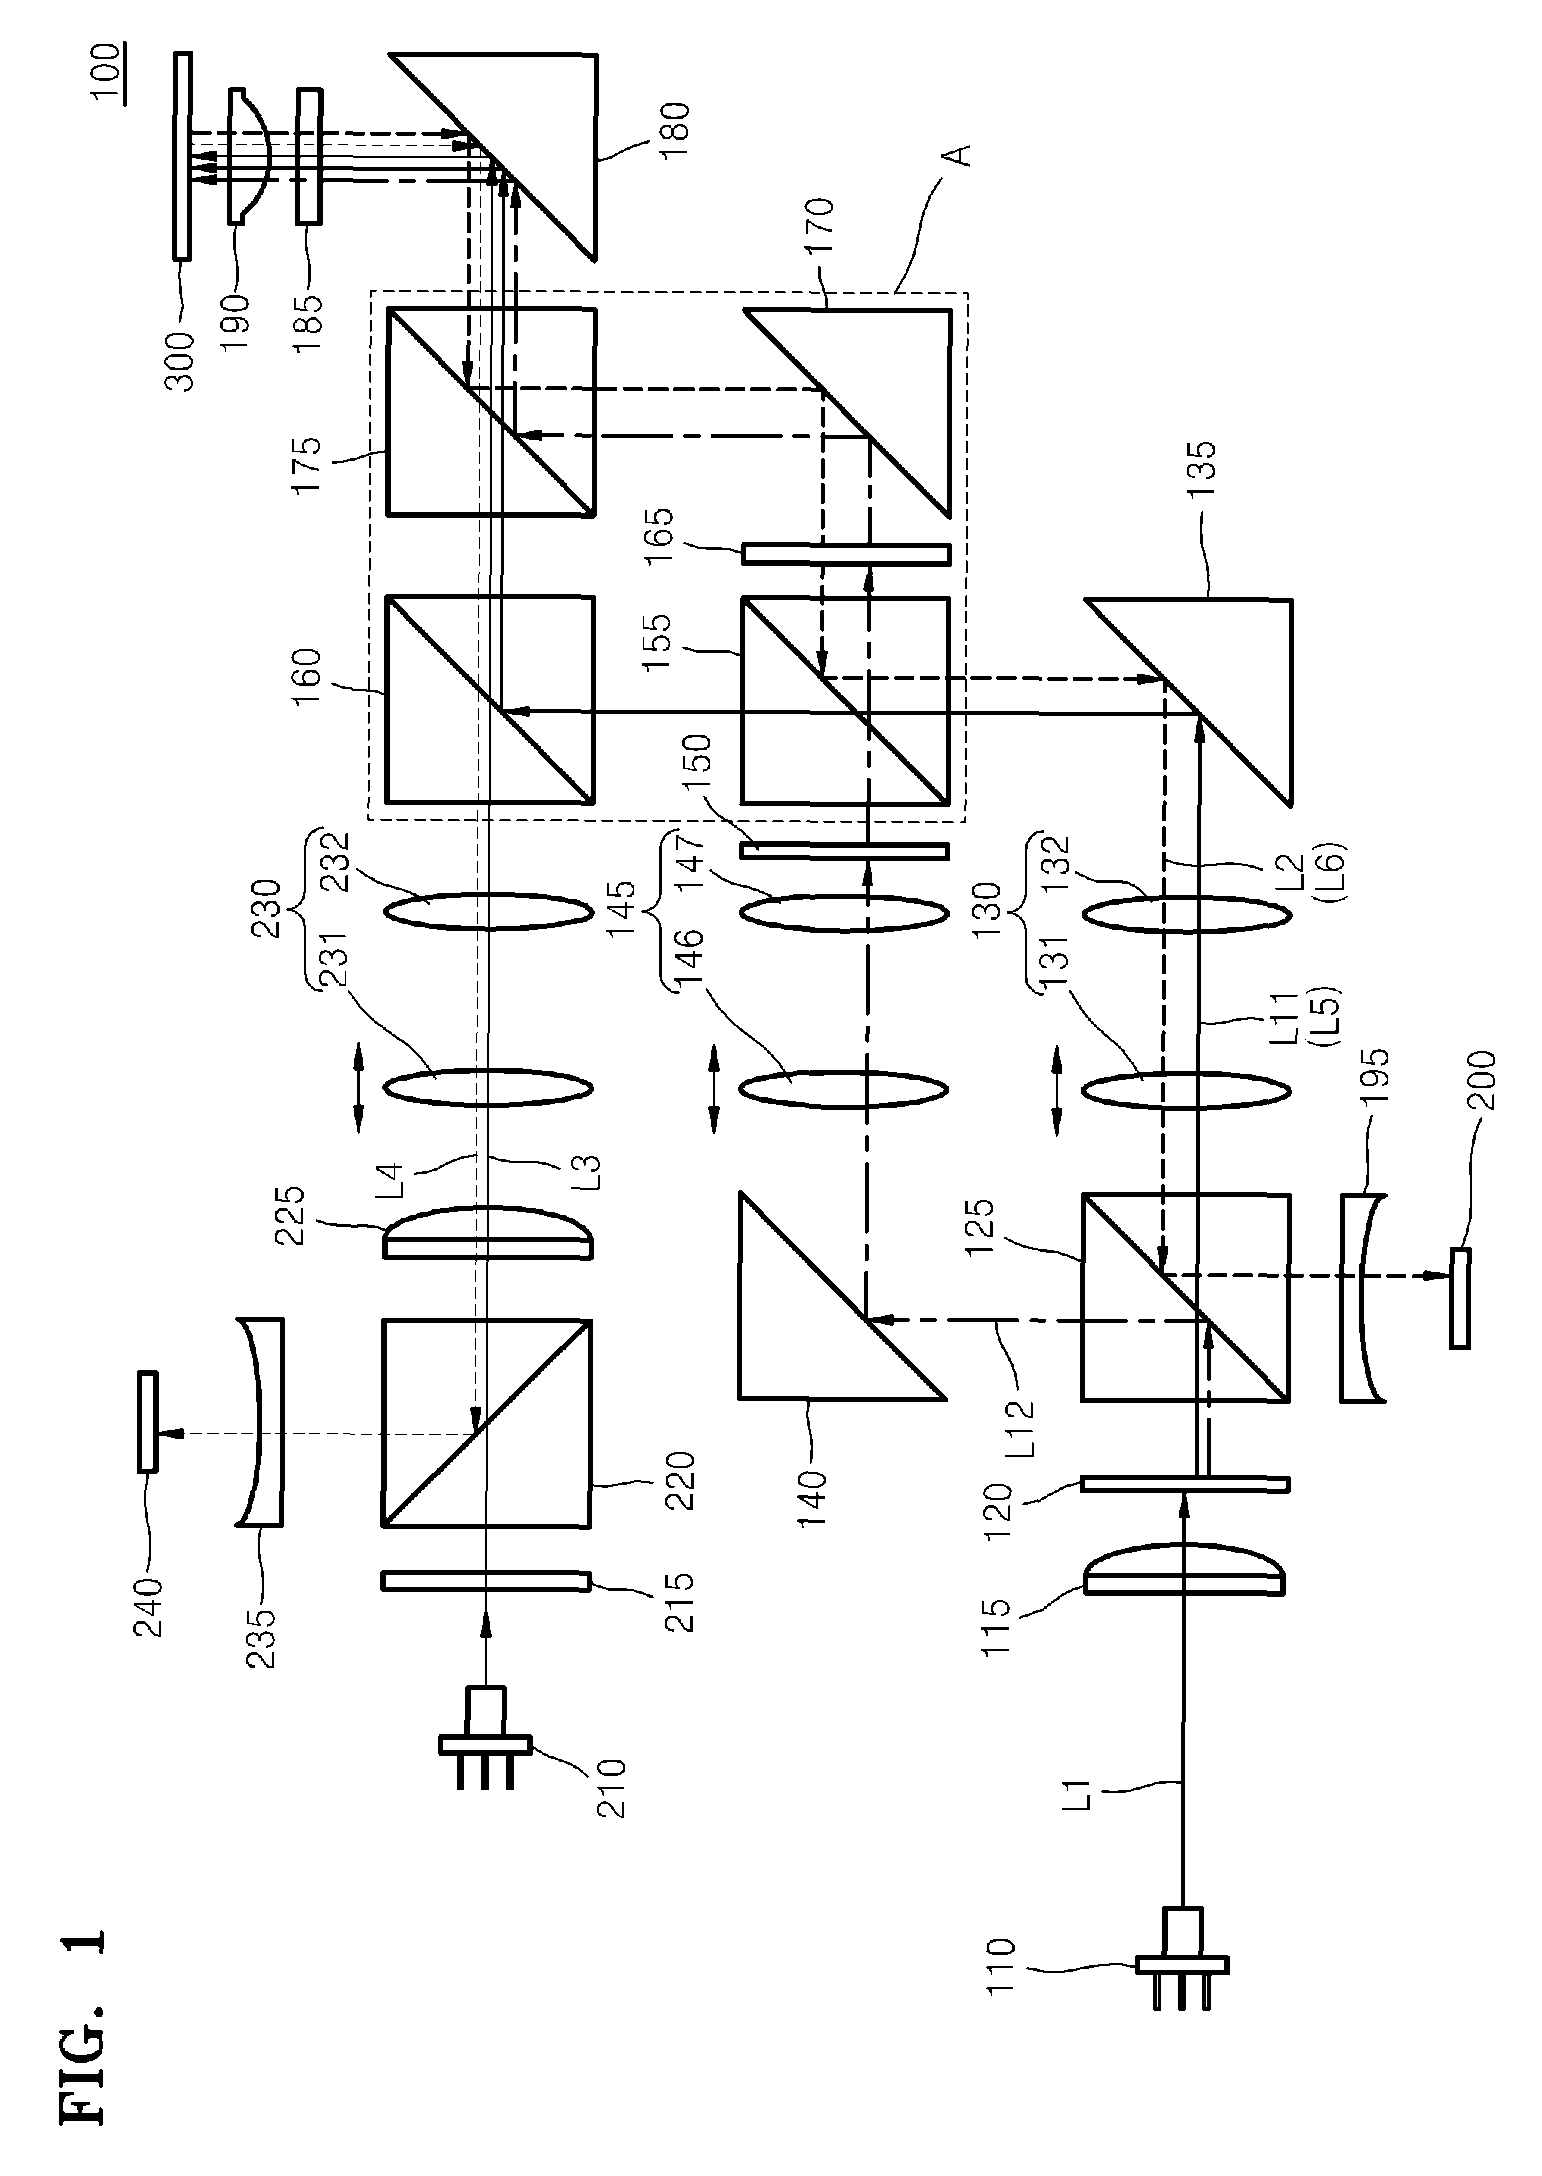 Holographic information recording and/or reproducing apparatus